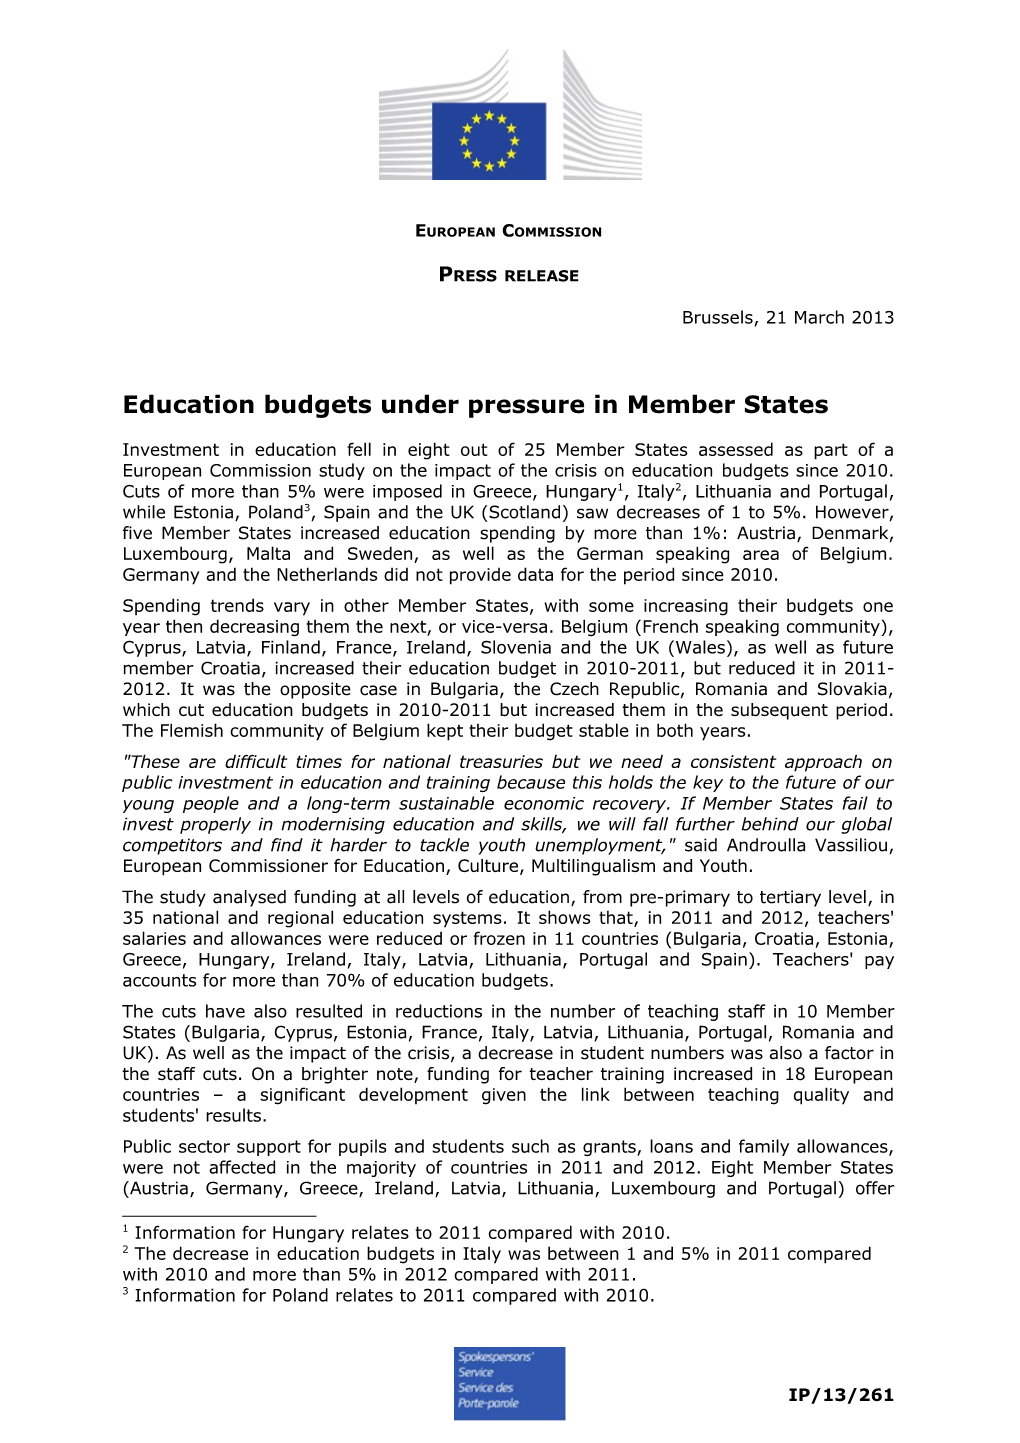 Education Budgets Under Pressure in Member States